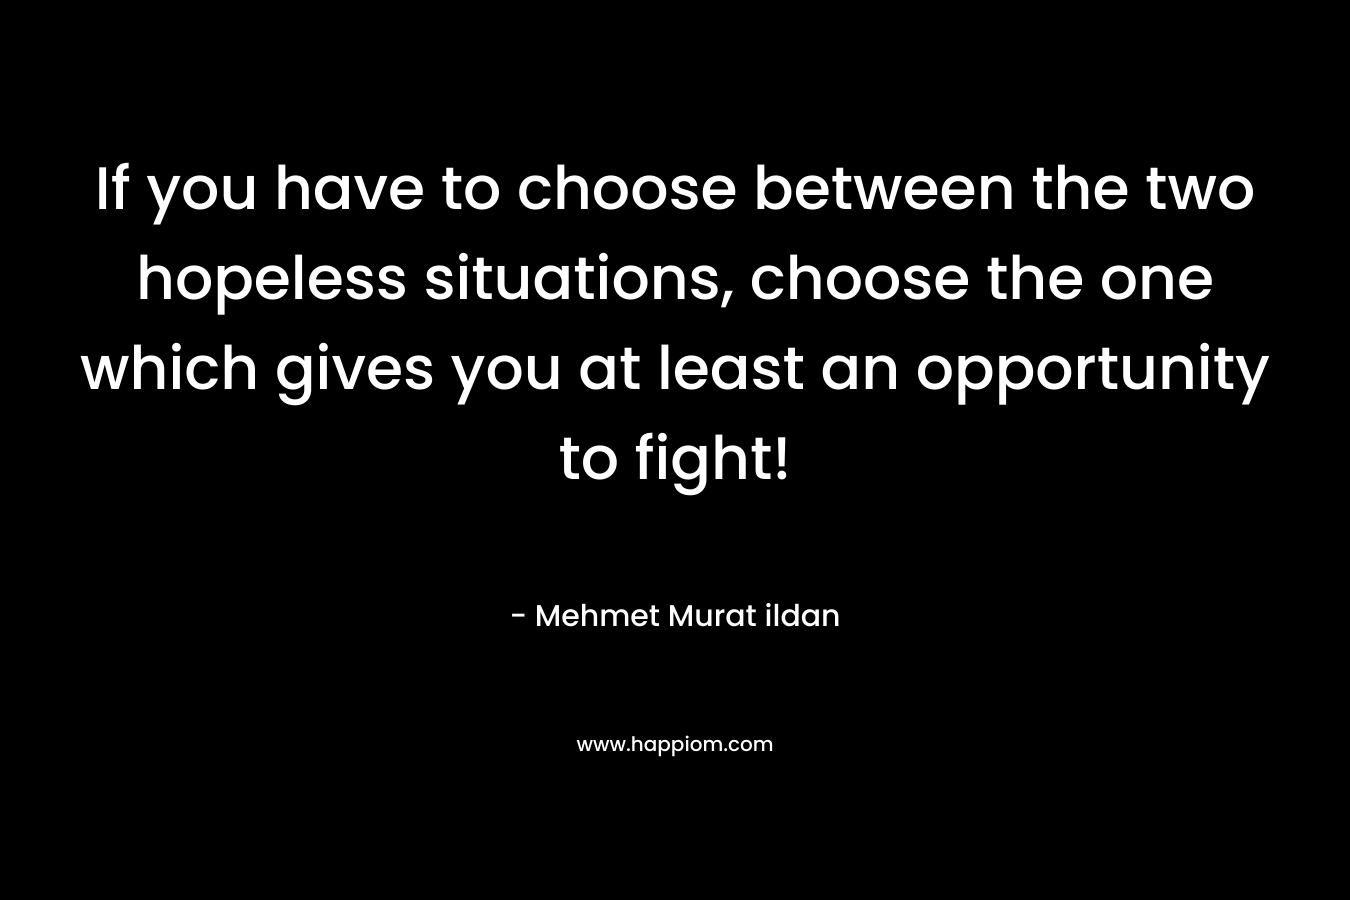 If you have to choose between the two hopeless situations, choose the one which gives you at least an opportunity to fight! – Mehmet Murat ildan